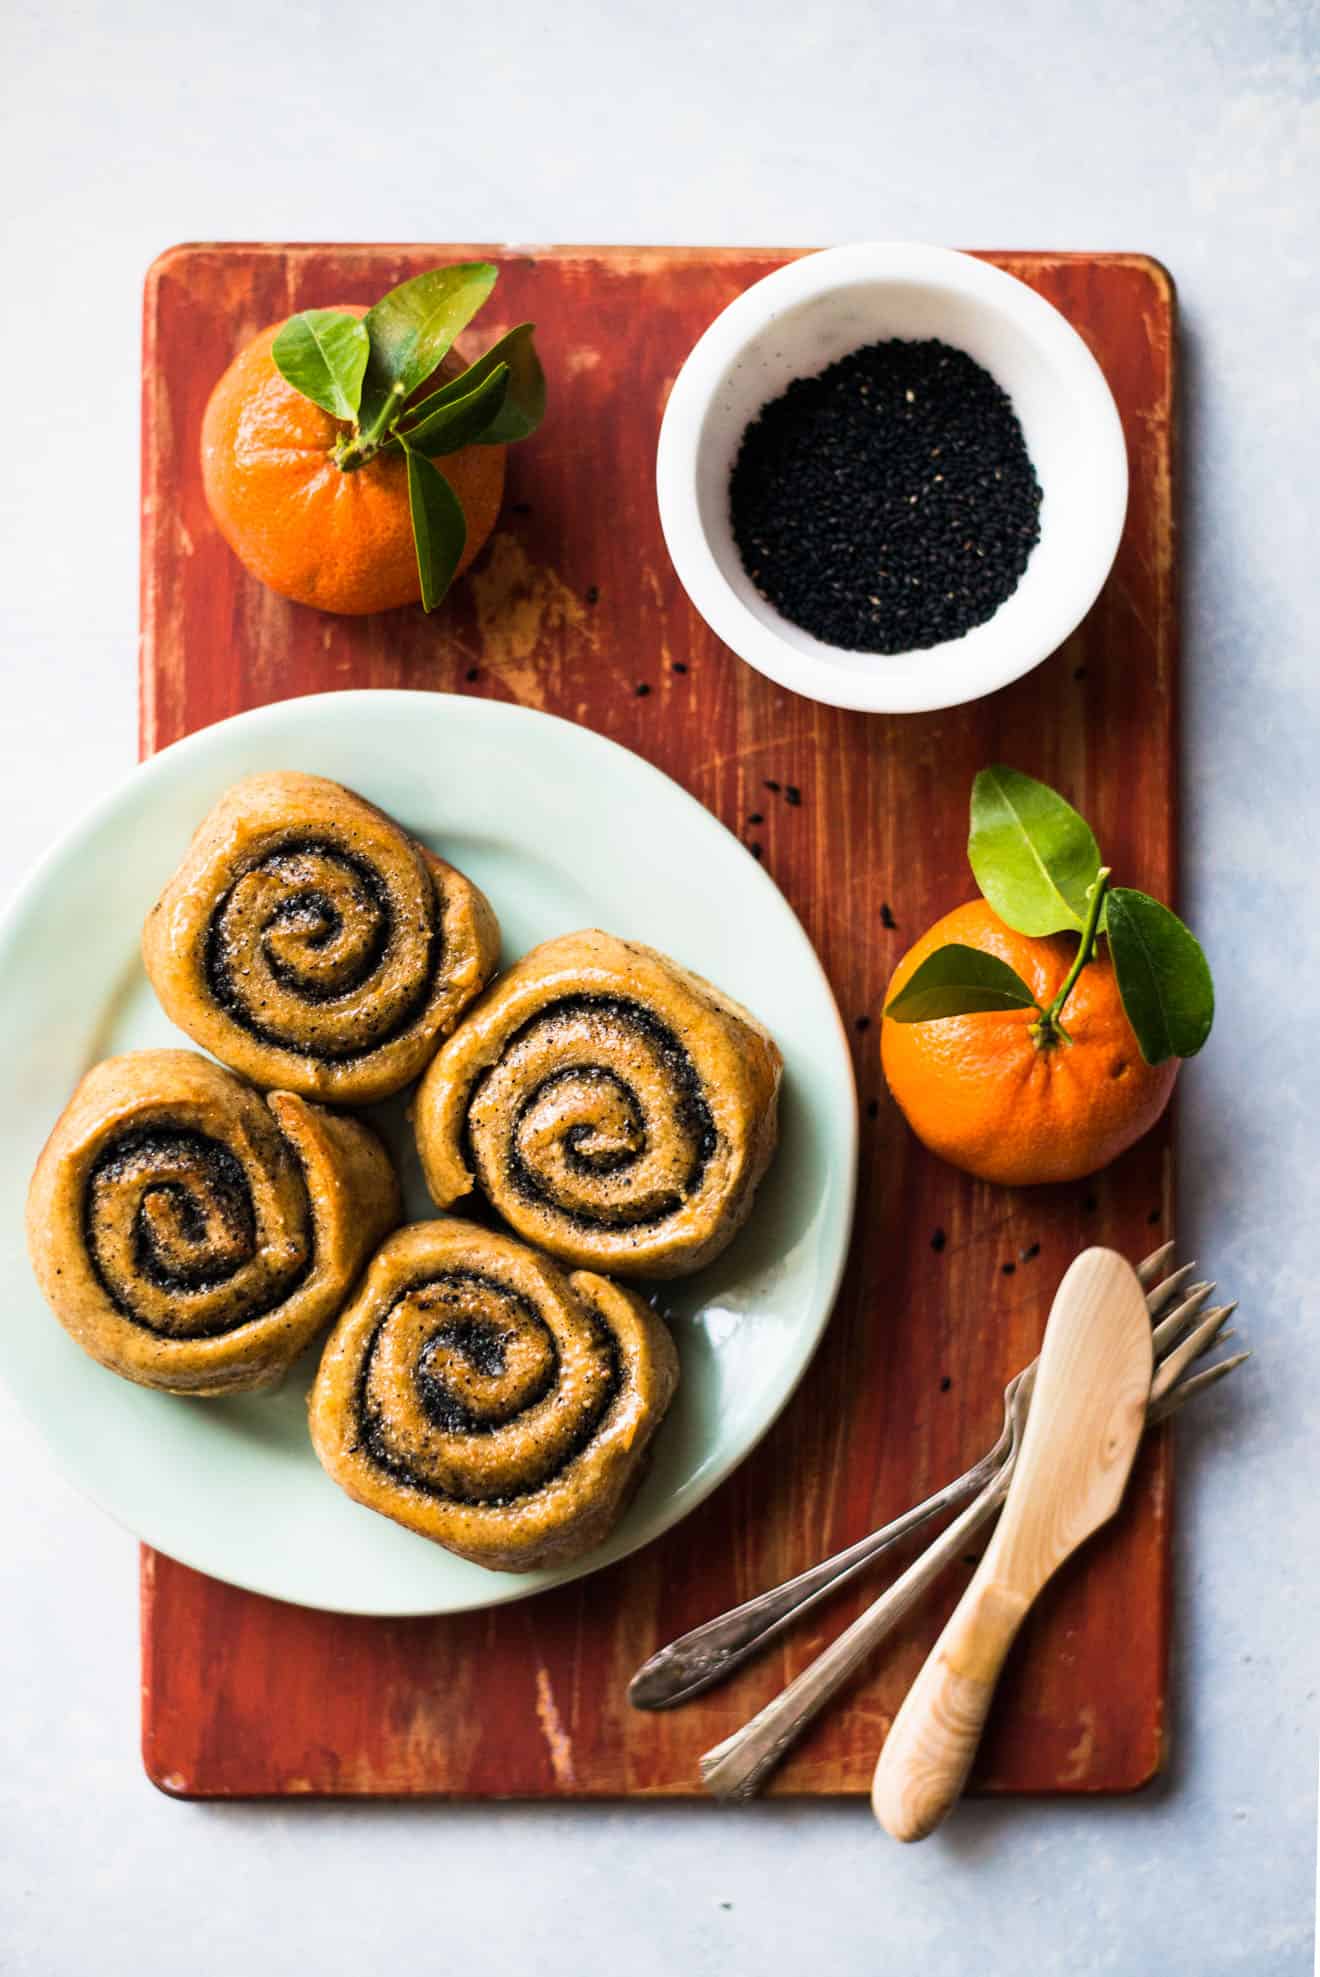 Vegan Black Sesame Rye Rolls - these light, fluffy rye rolls are easy to make and they contain much less sugar and butter than traditional rolls!